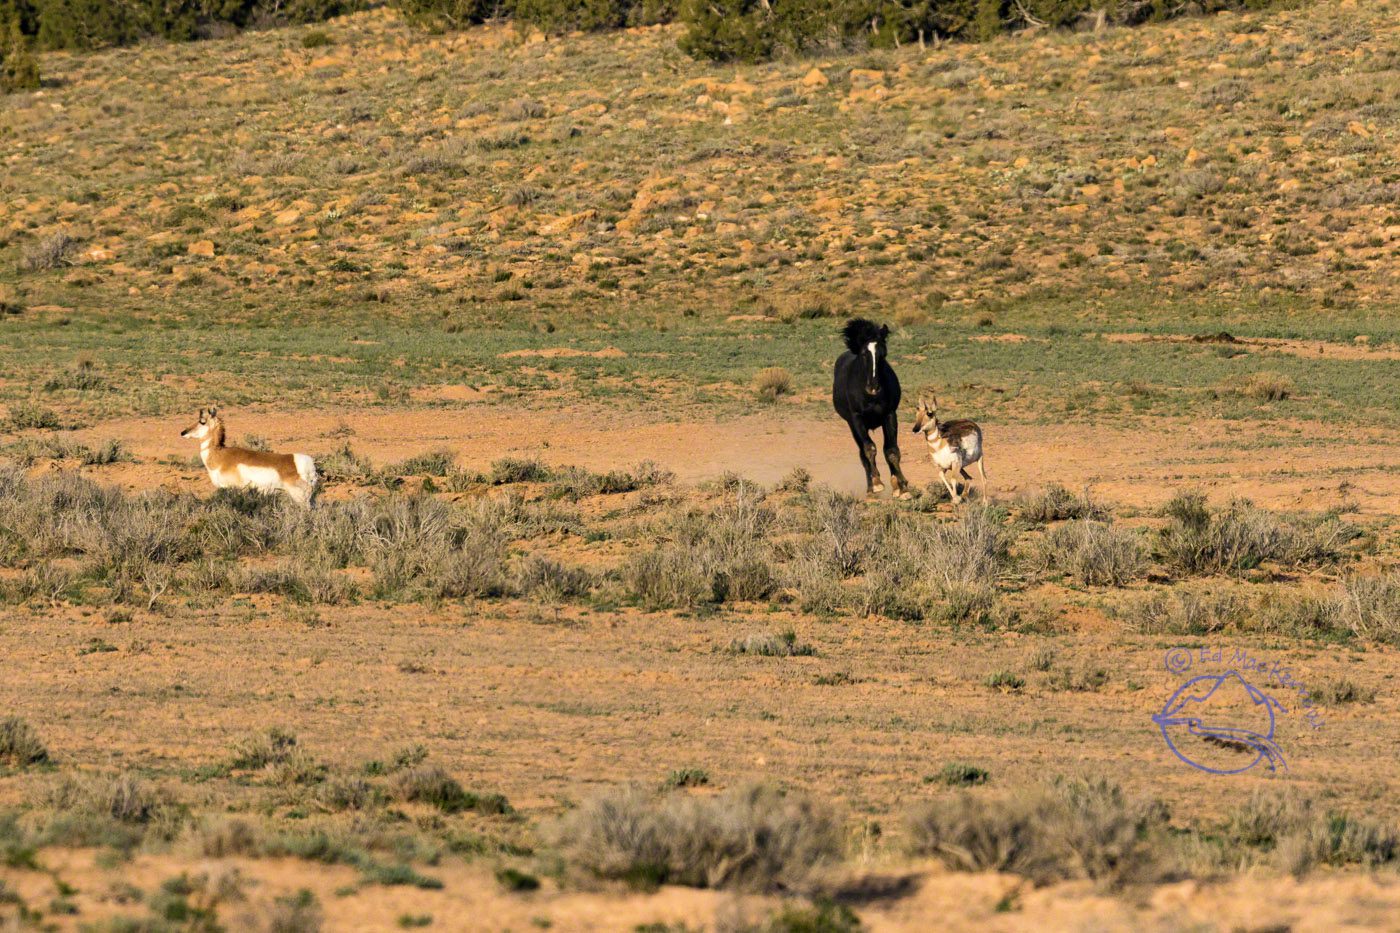 A mustang stallion plays a game of chase with an antelope.